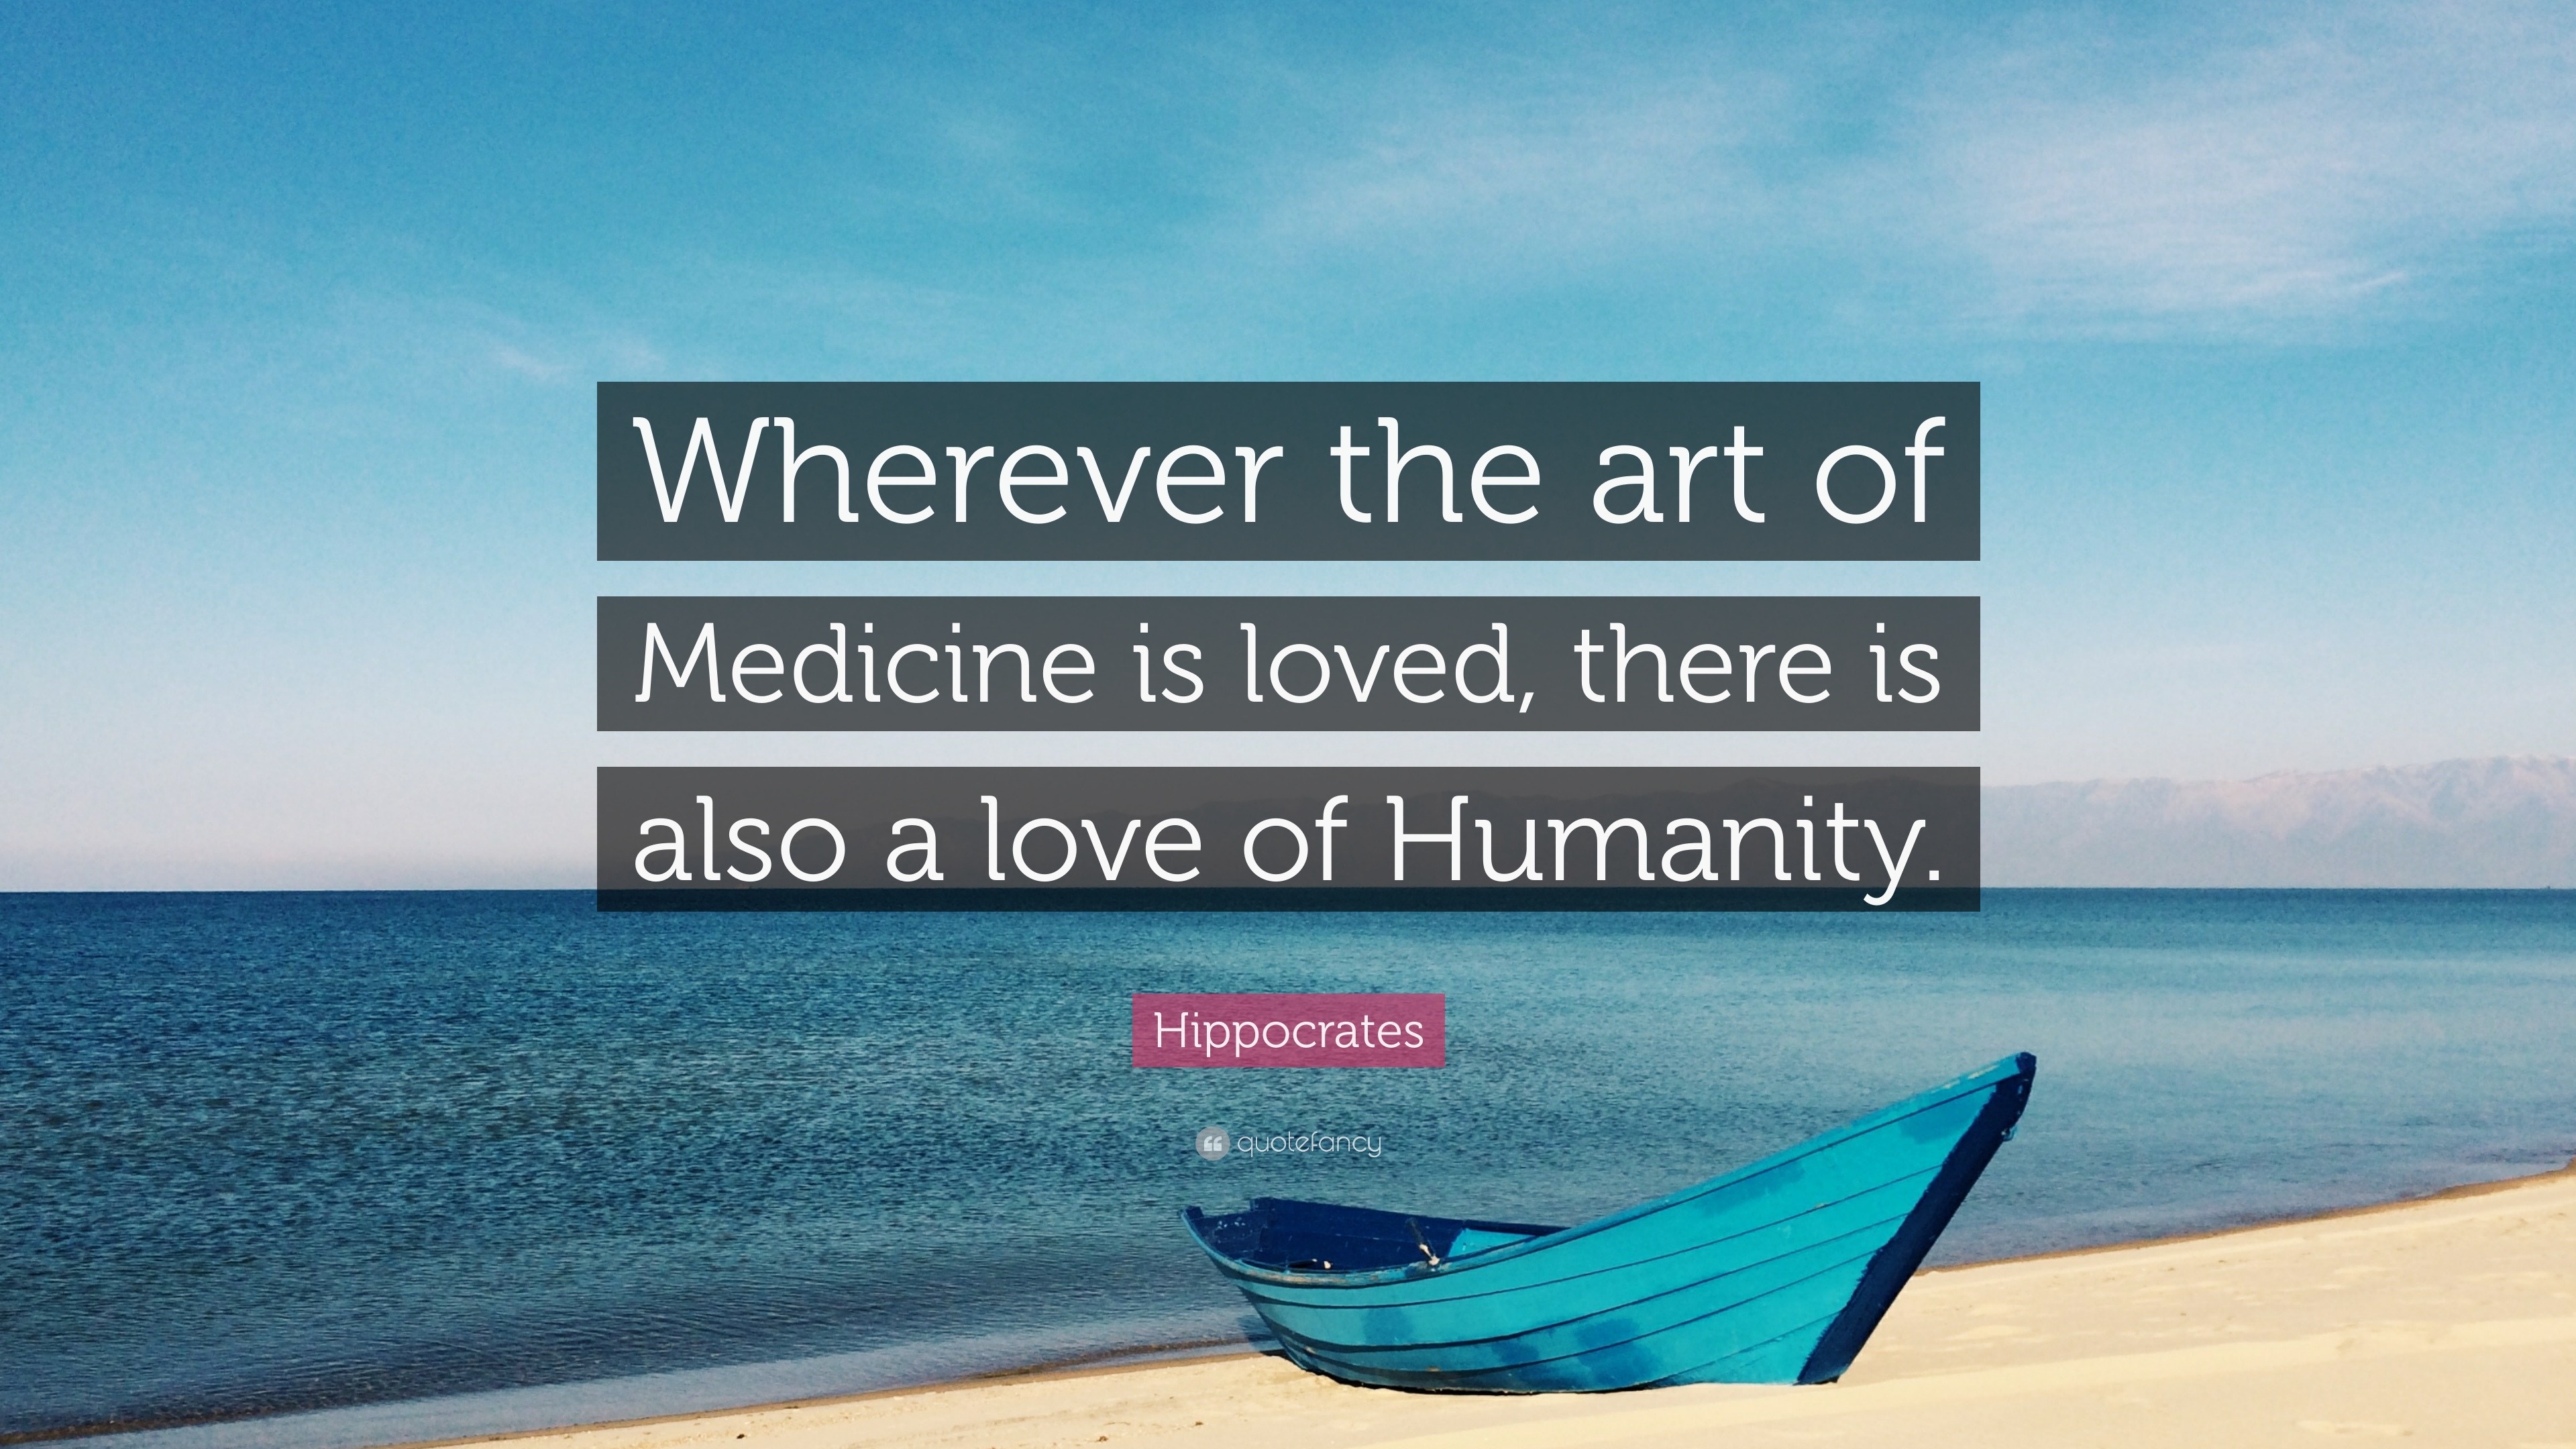 Hippocrates Quote: “Wherever the art of Medicine is loved, there is